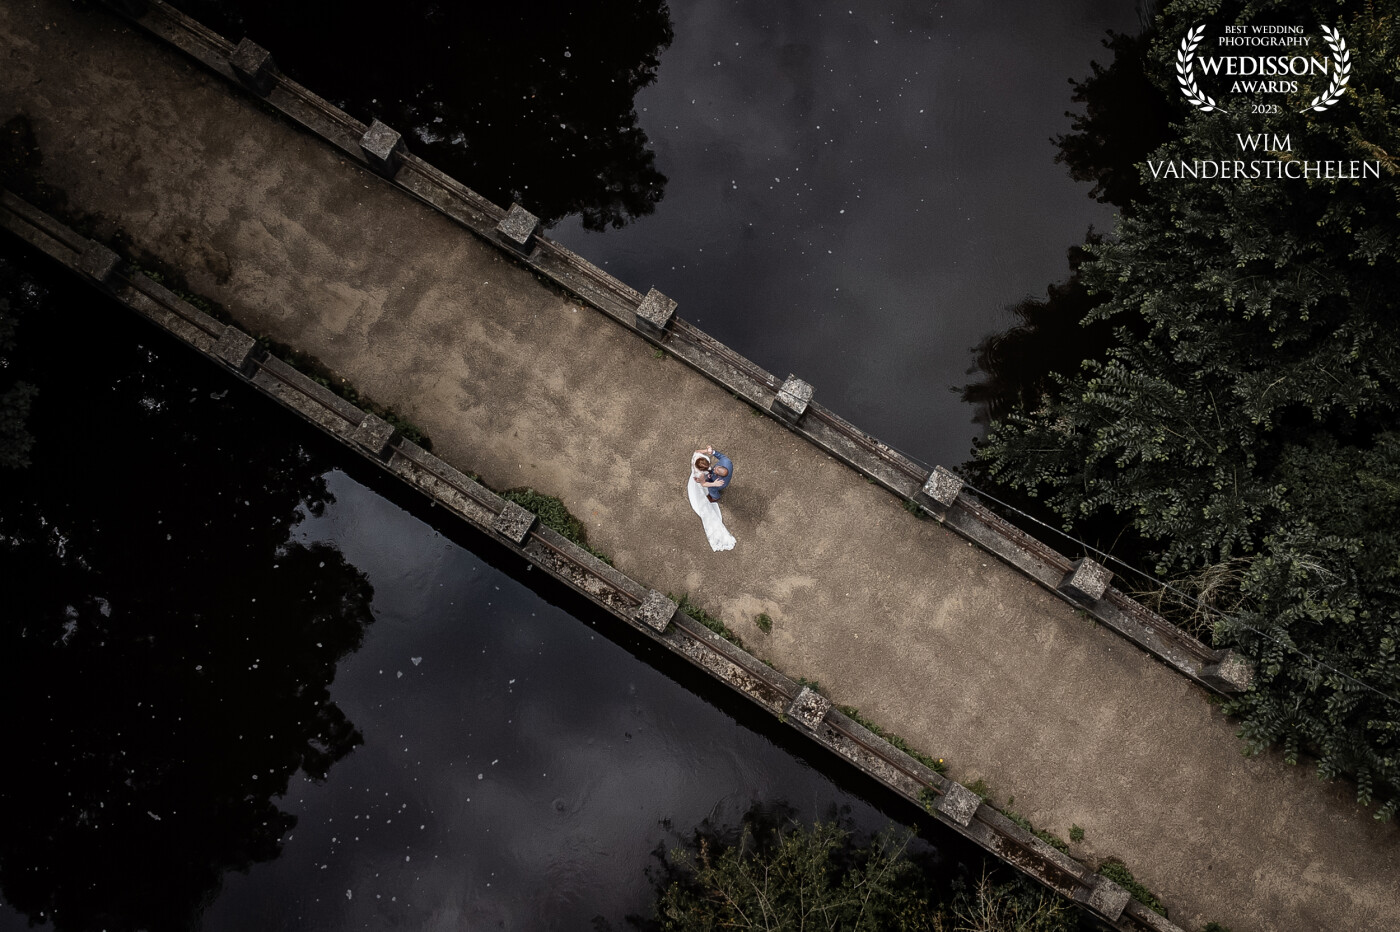 As we were walking down the bridge, I thought it would be fun to take the drone up for a flight. The bridge was splitting the image in half as the couple was practising their first dance.